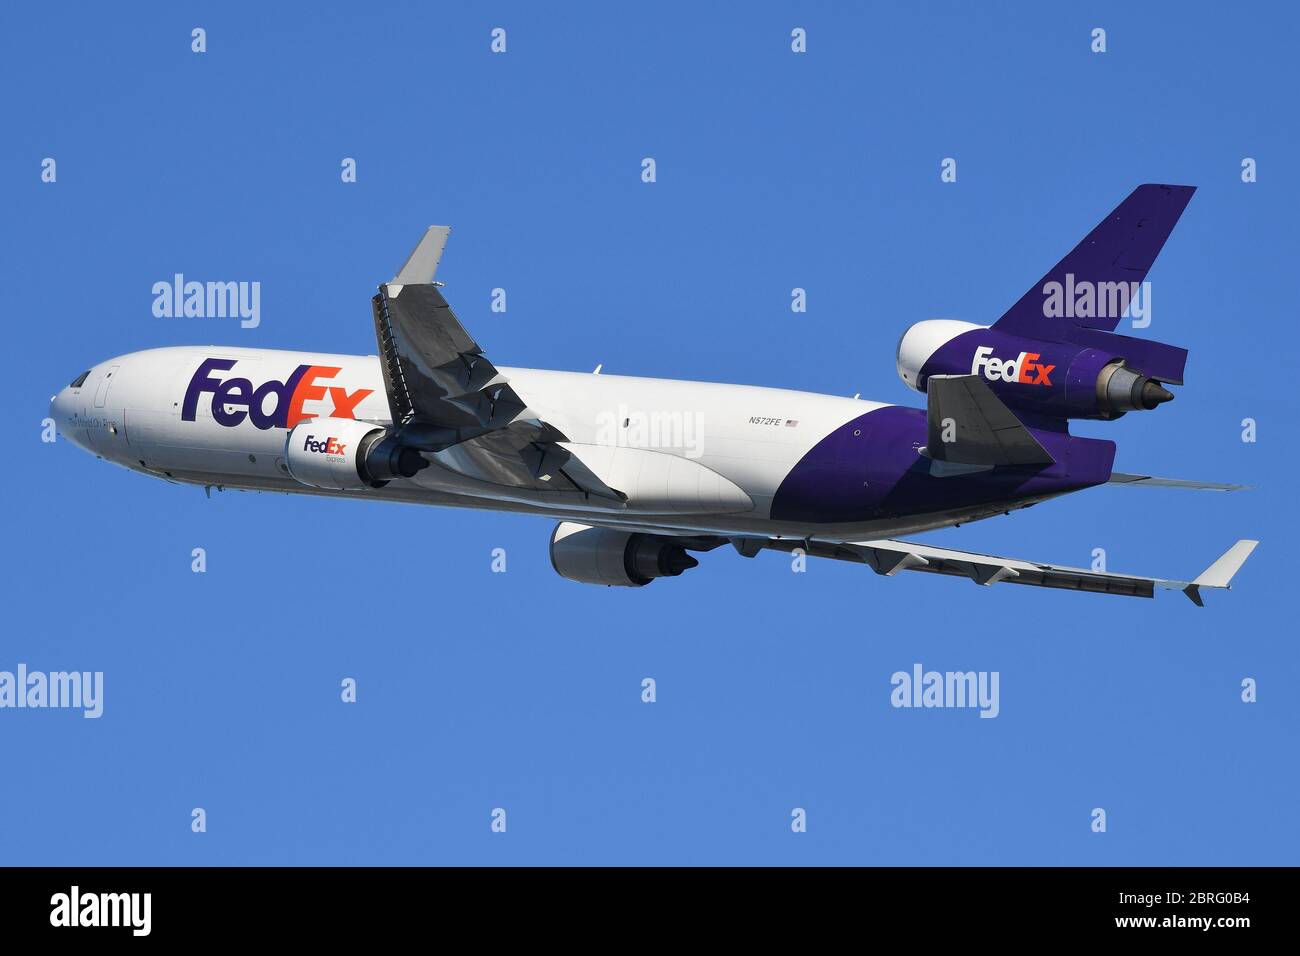 FEDEX (FEDERAL EXPRESS) McDONNELL-DOUGLAS MD-11F FREIGHTER DEPARTING LOS ANGELES. Stock Photo